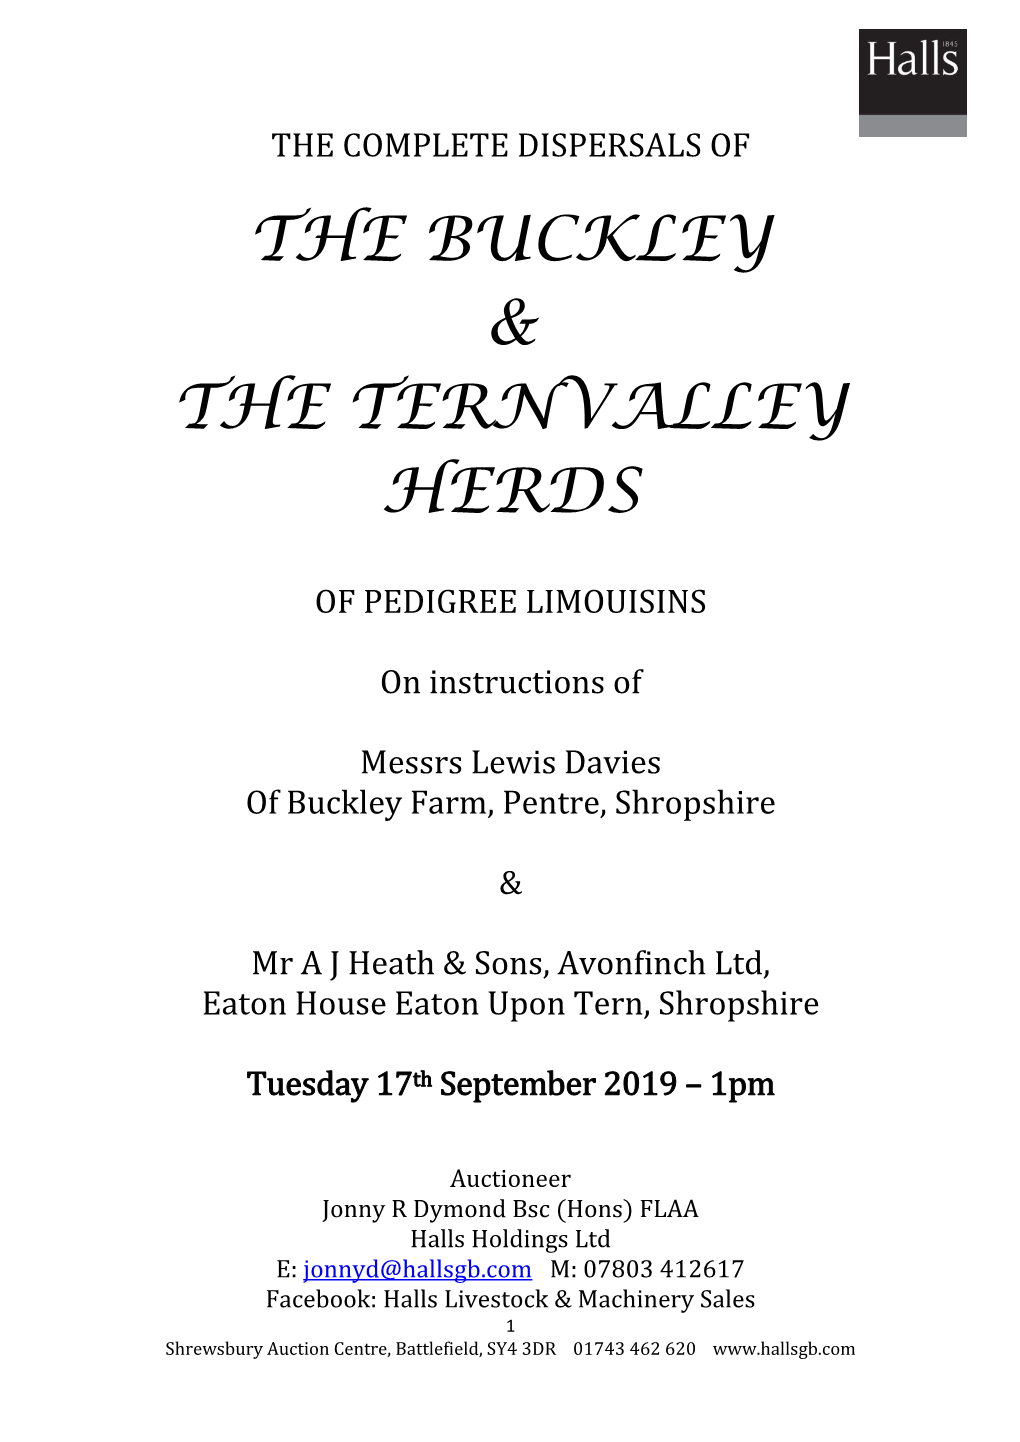 The Buckley & the Ternvalley Herds